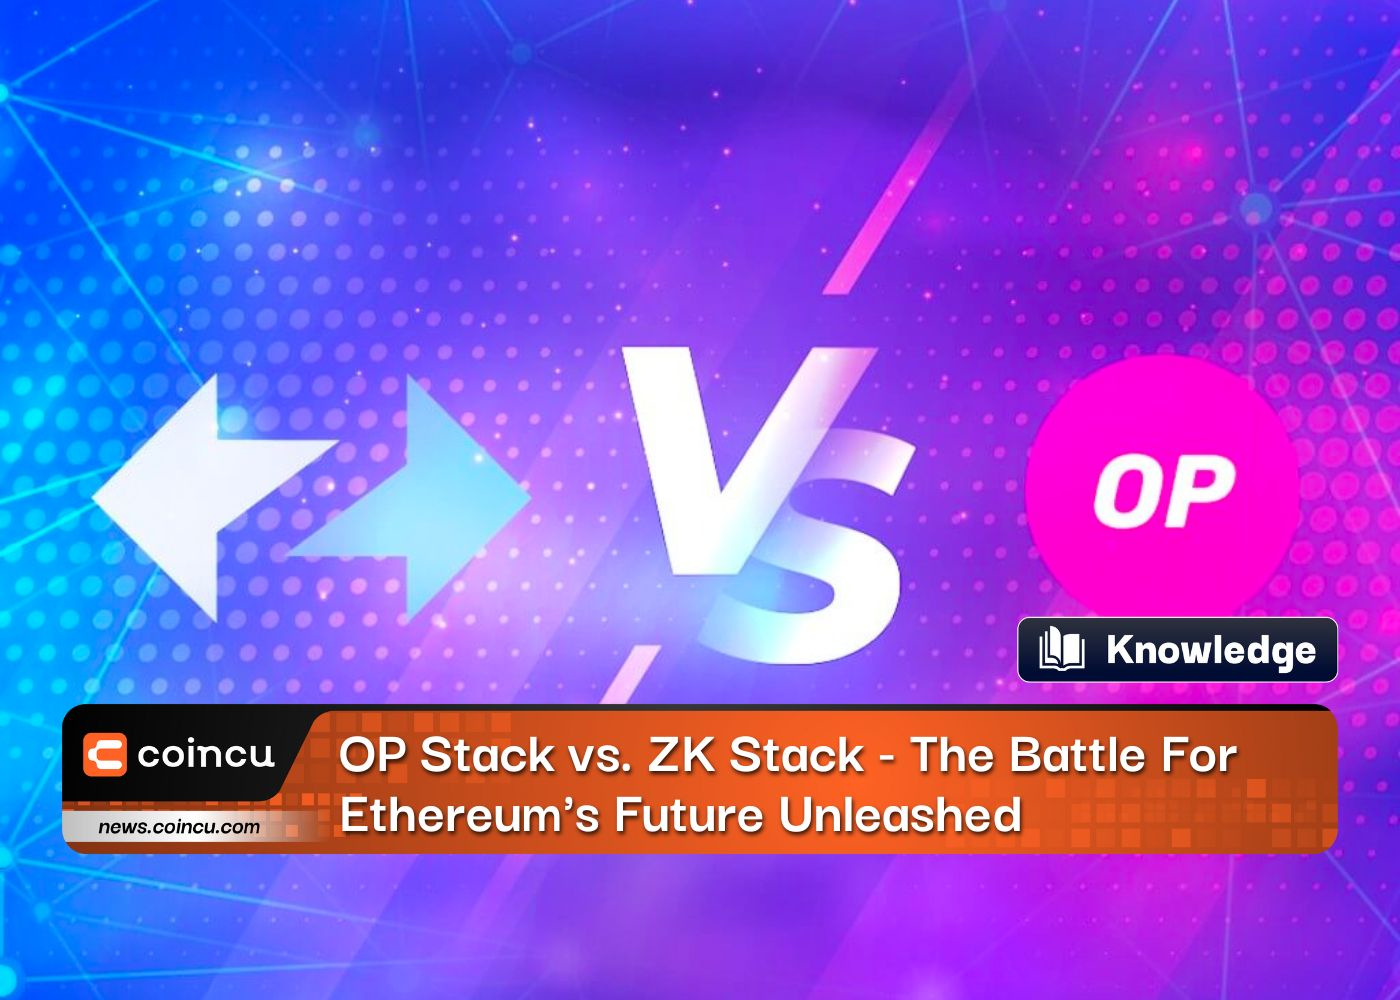 OP Stack vs. ZK Stack - The Battle For Ethereum's Future Unleashed